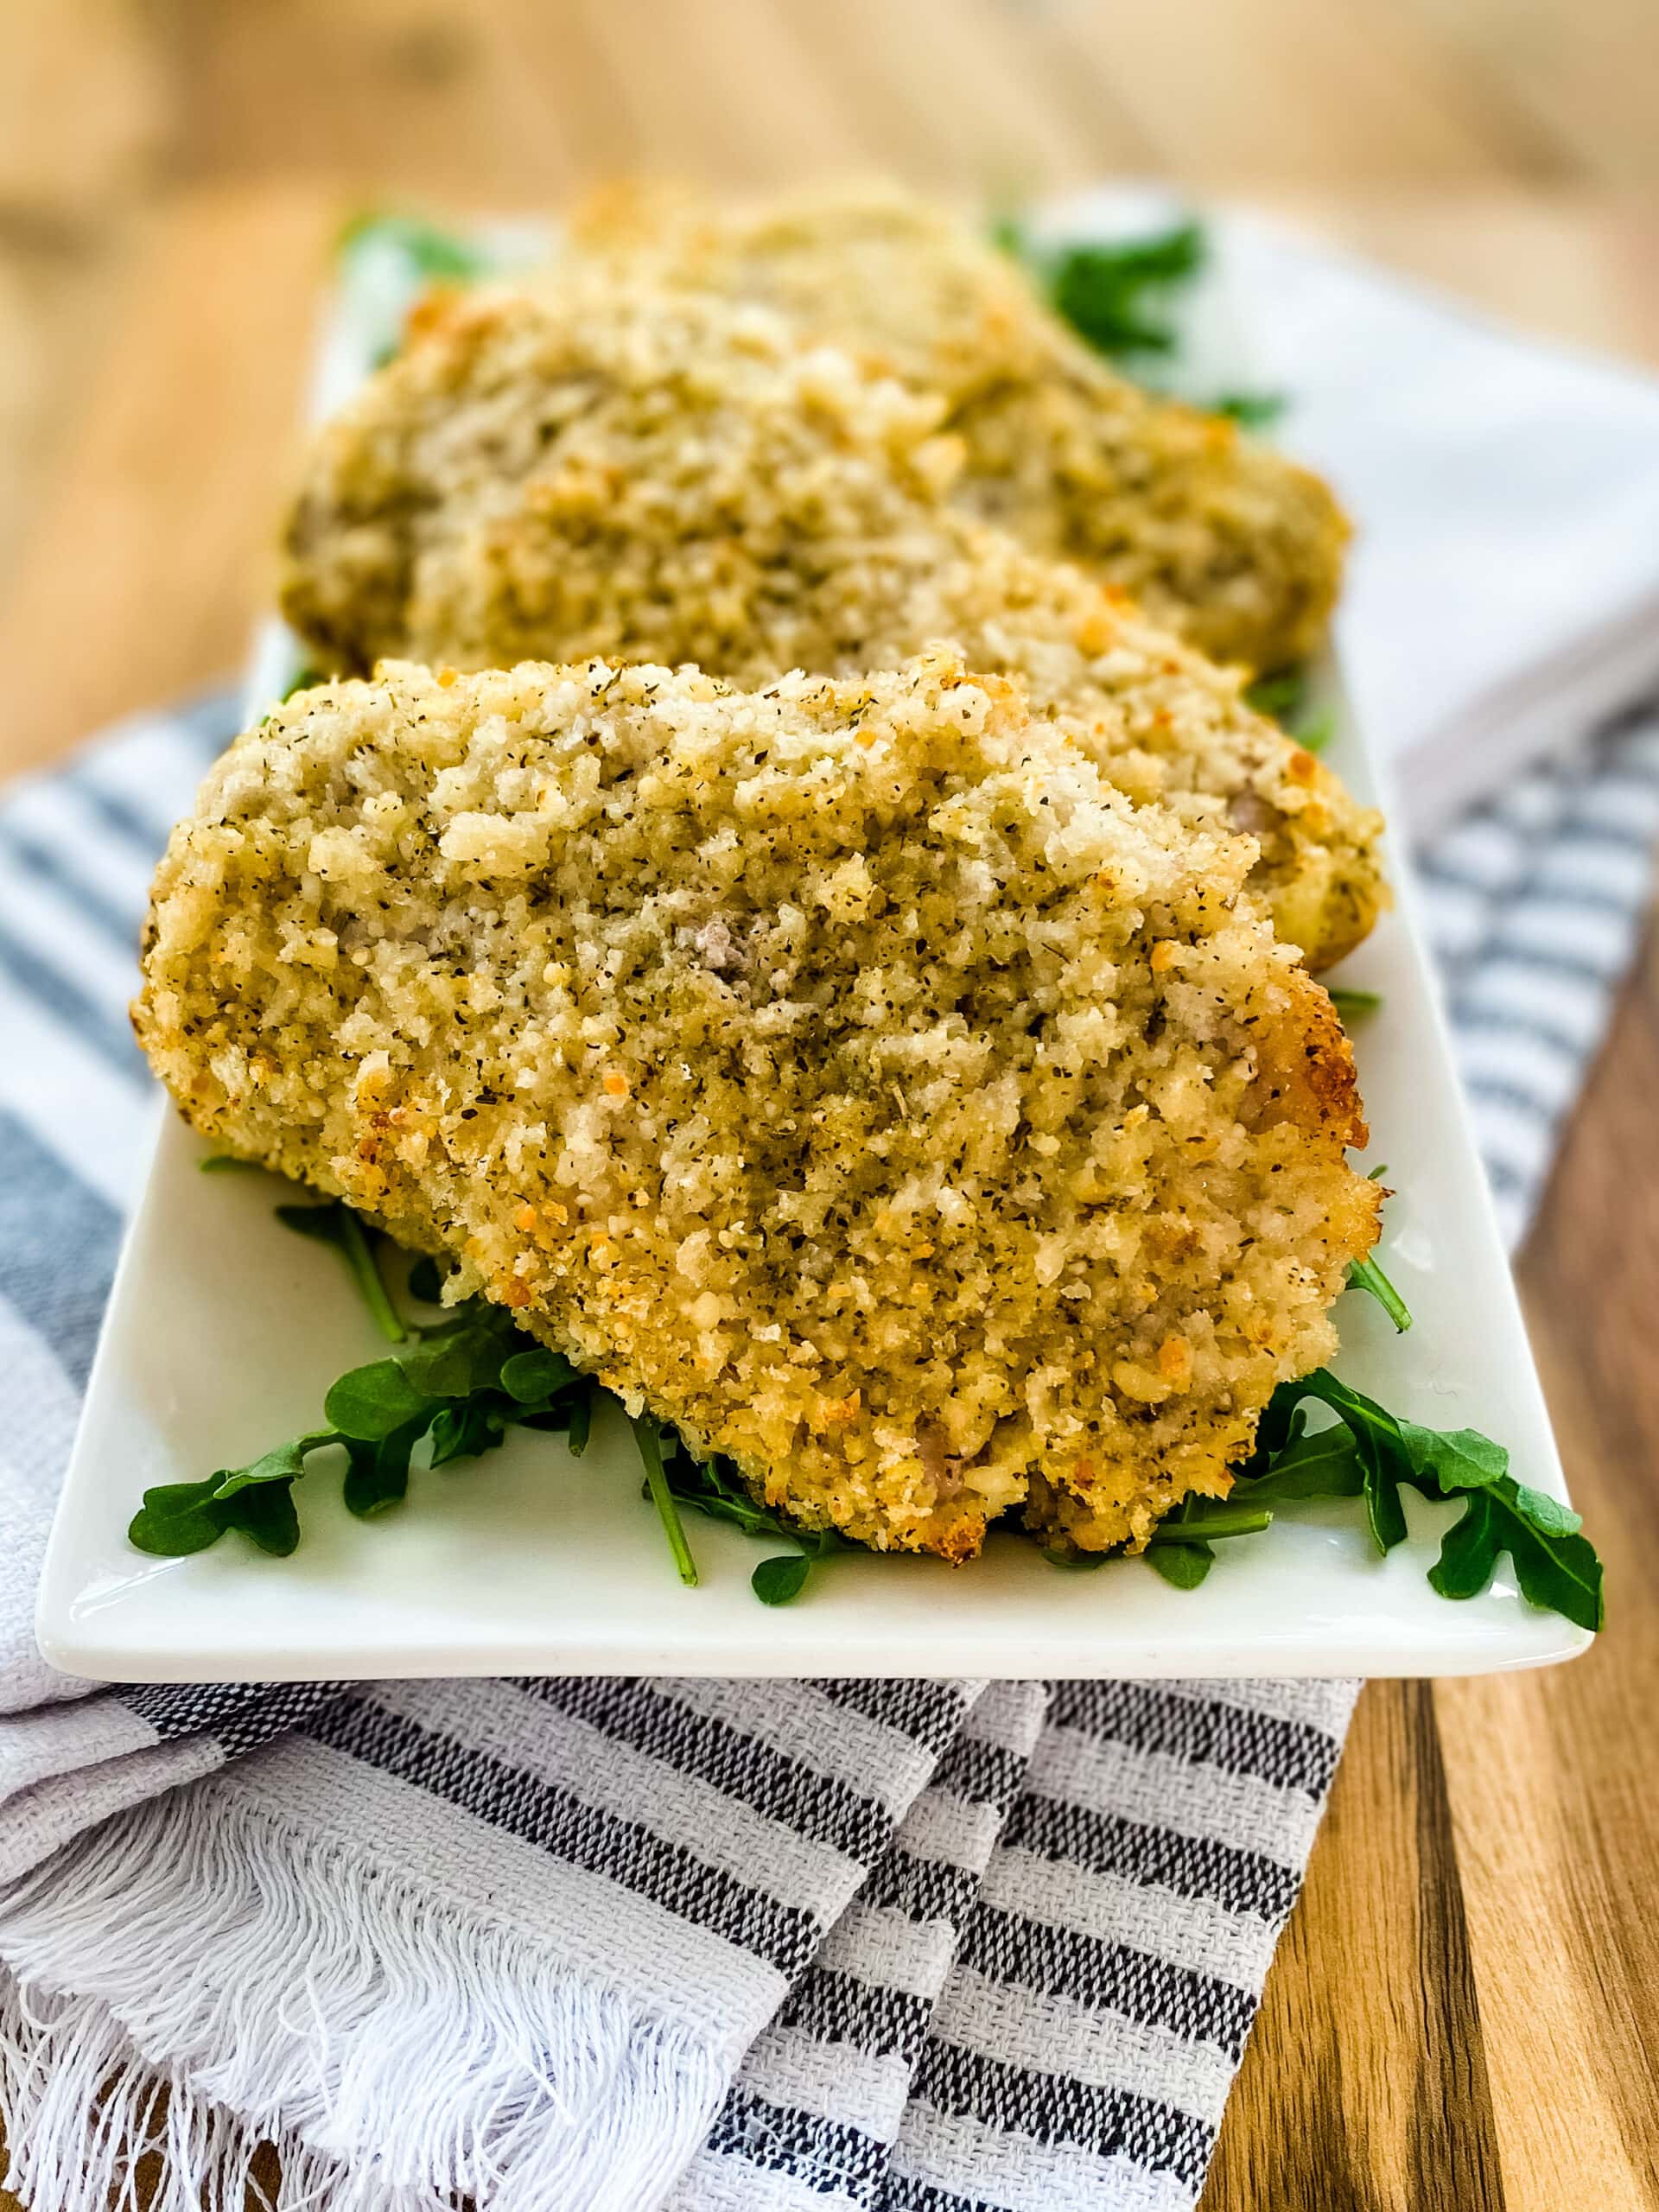 Plate with Parmesan Crusted Pork Chops. Cooking With Fudge